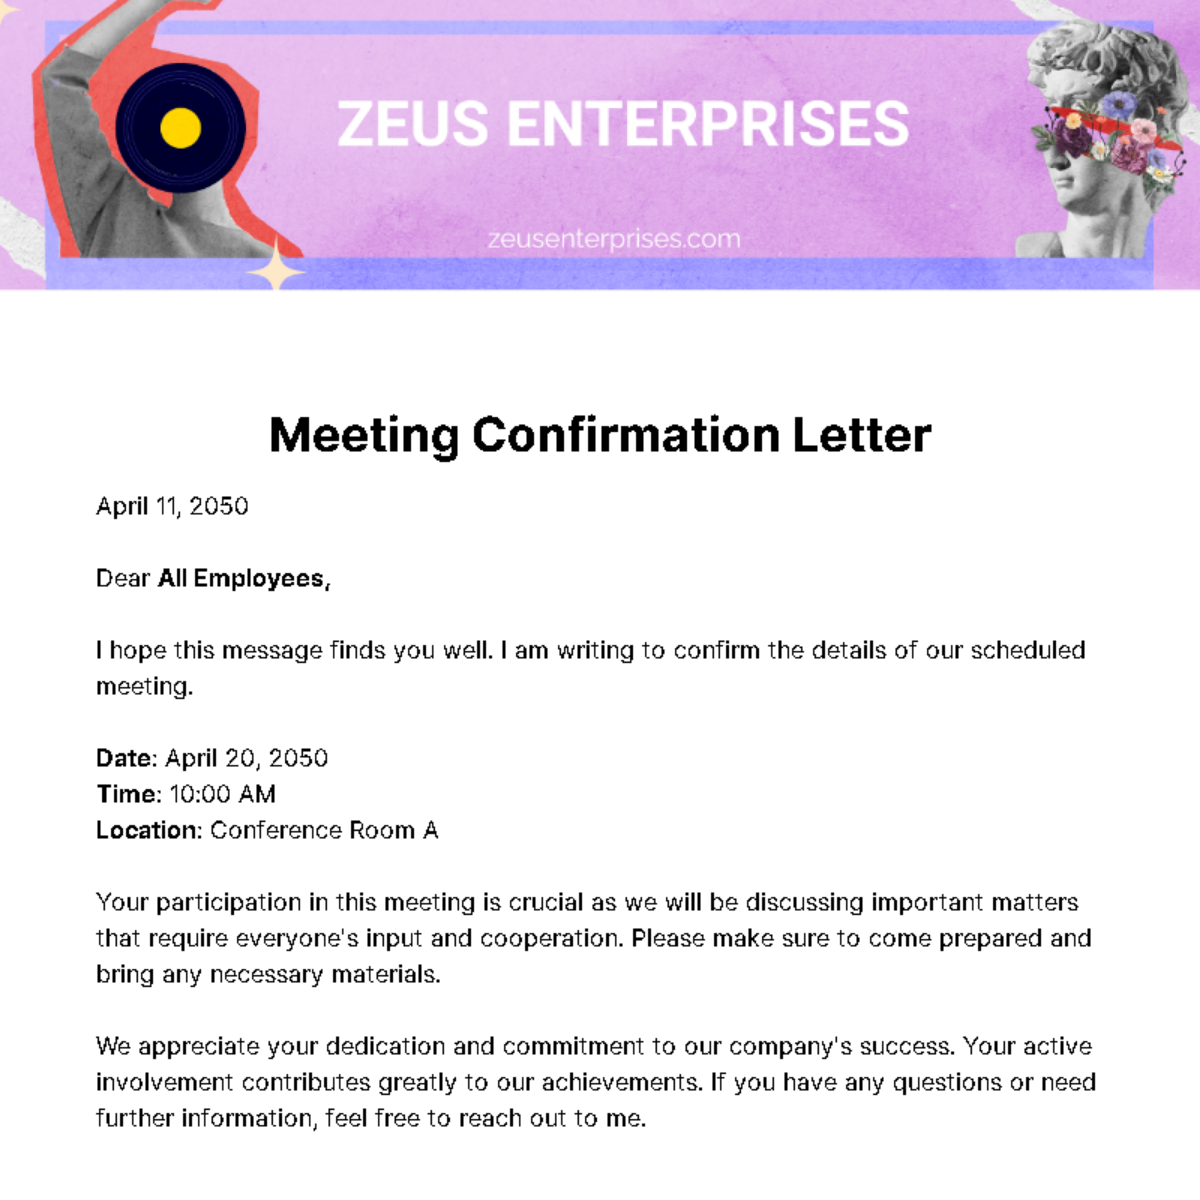 Meeting Confirmation Letter Template